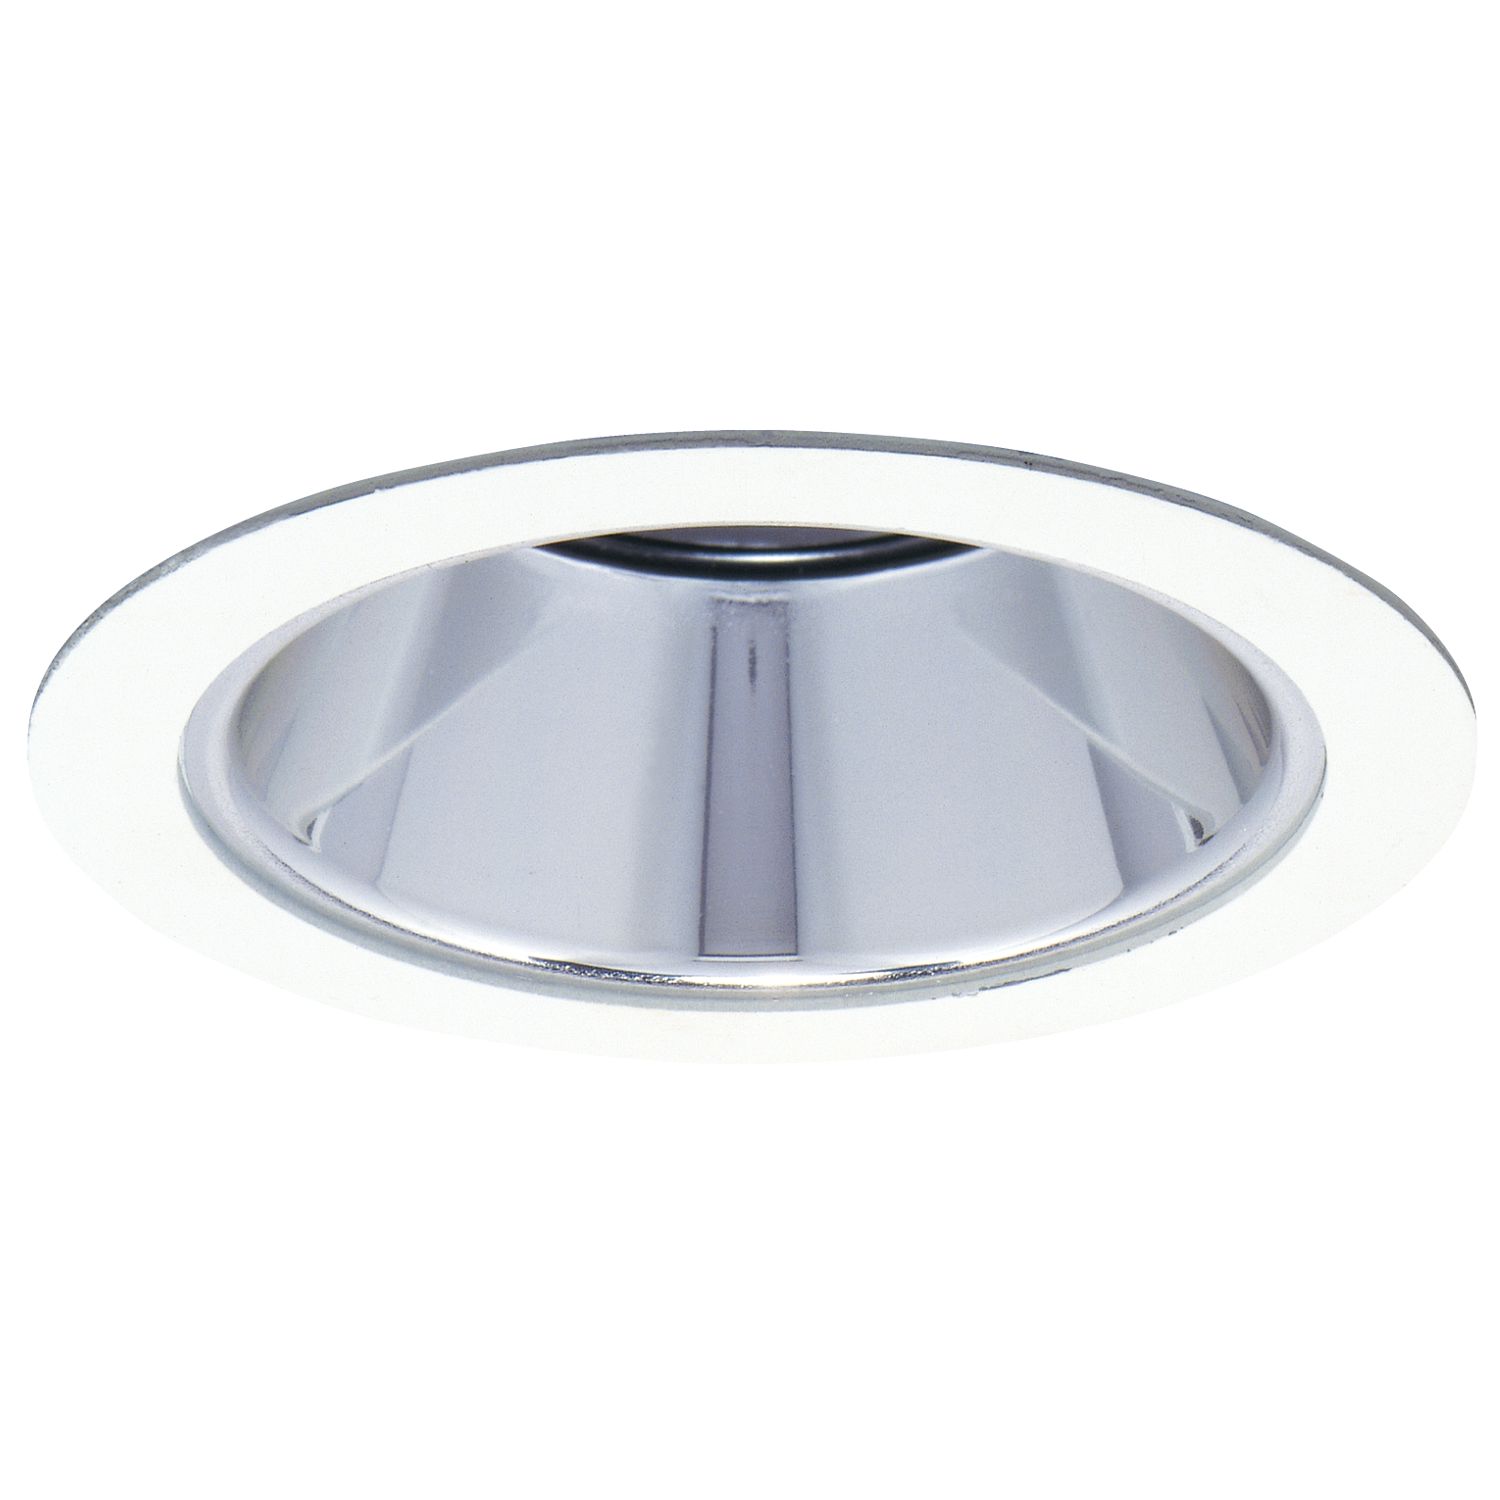 SPECULAR REFLECTOR CONE, CLEAR